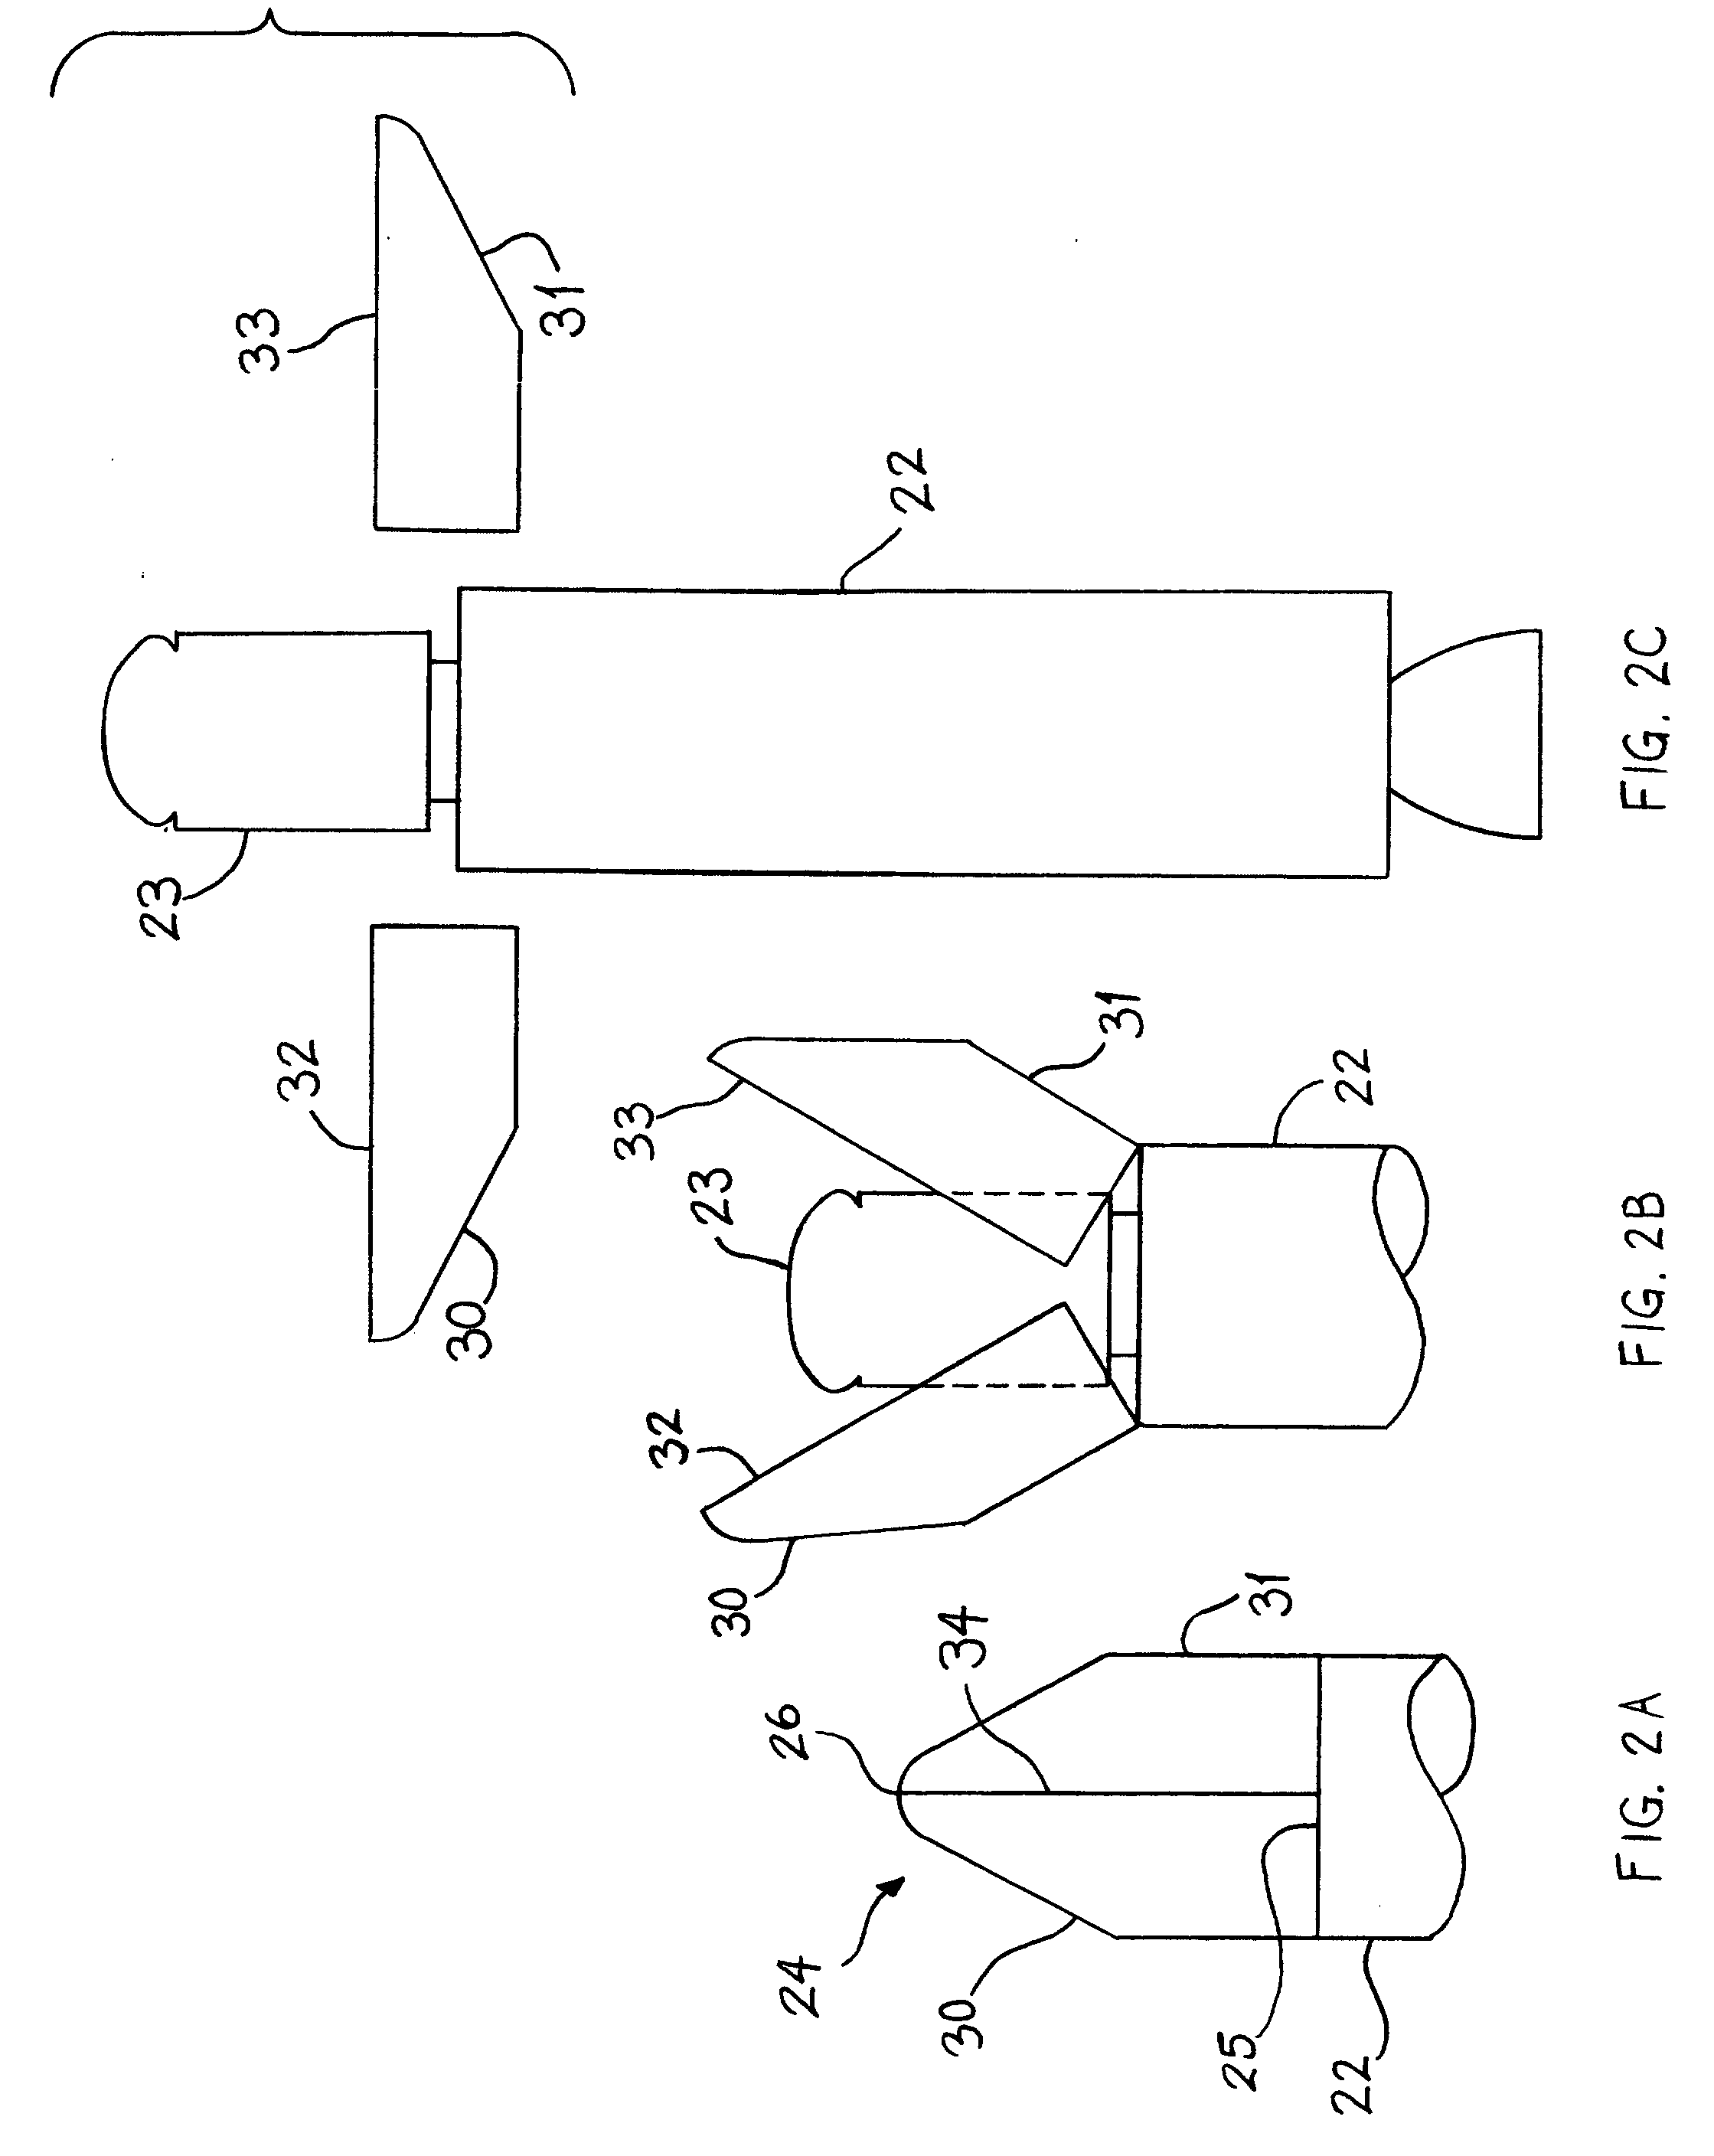 Payload fairing separation system